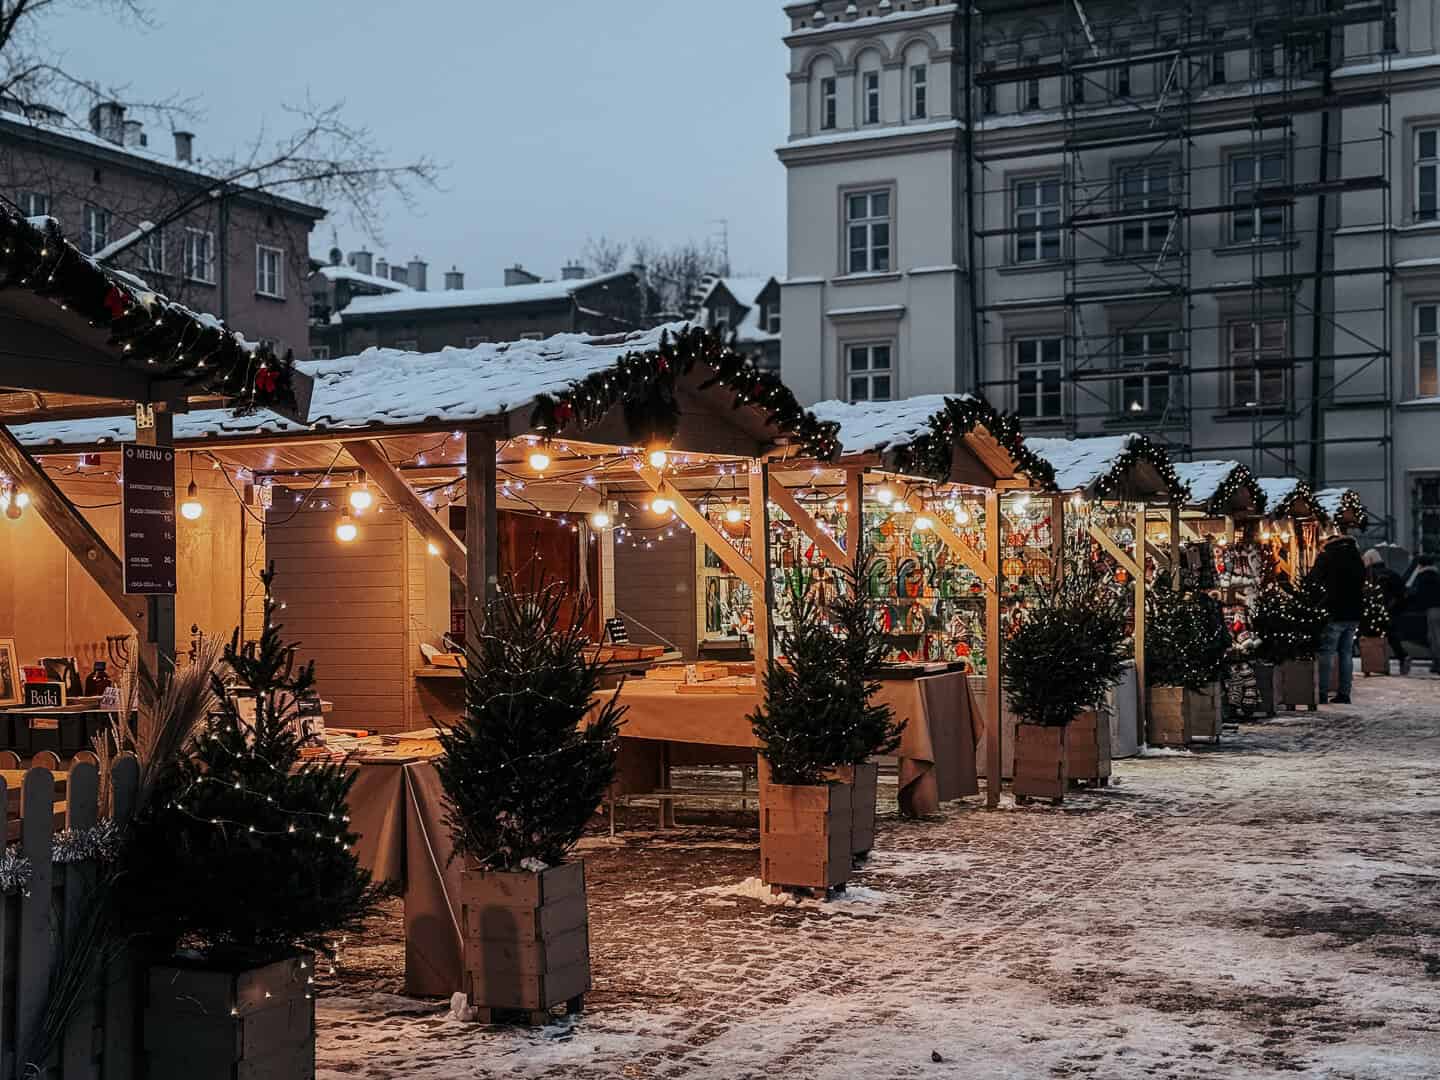 Twilight over a snow-dusted Christmas market in Krakow with a row of wooden stalls decorated with lights and wreaths